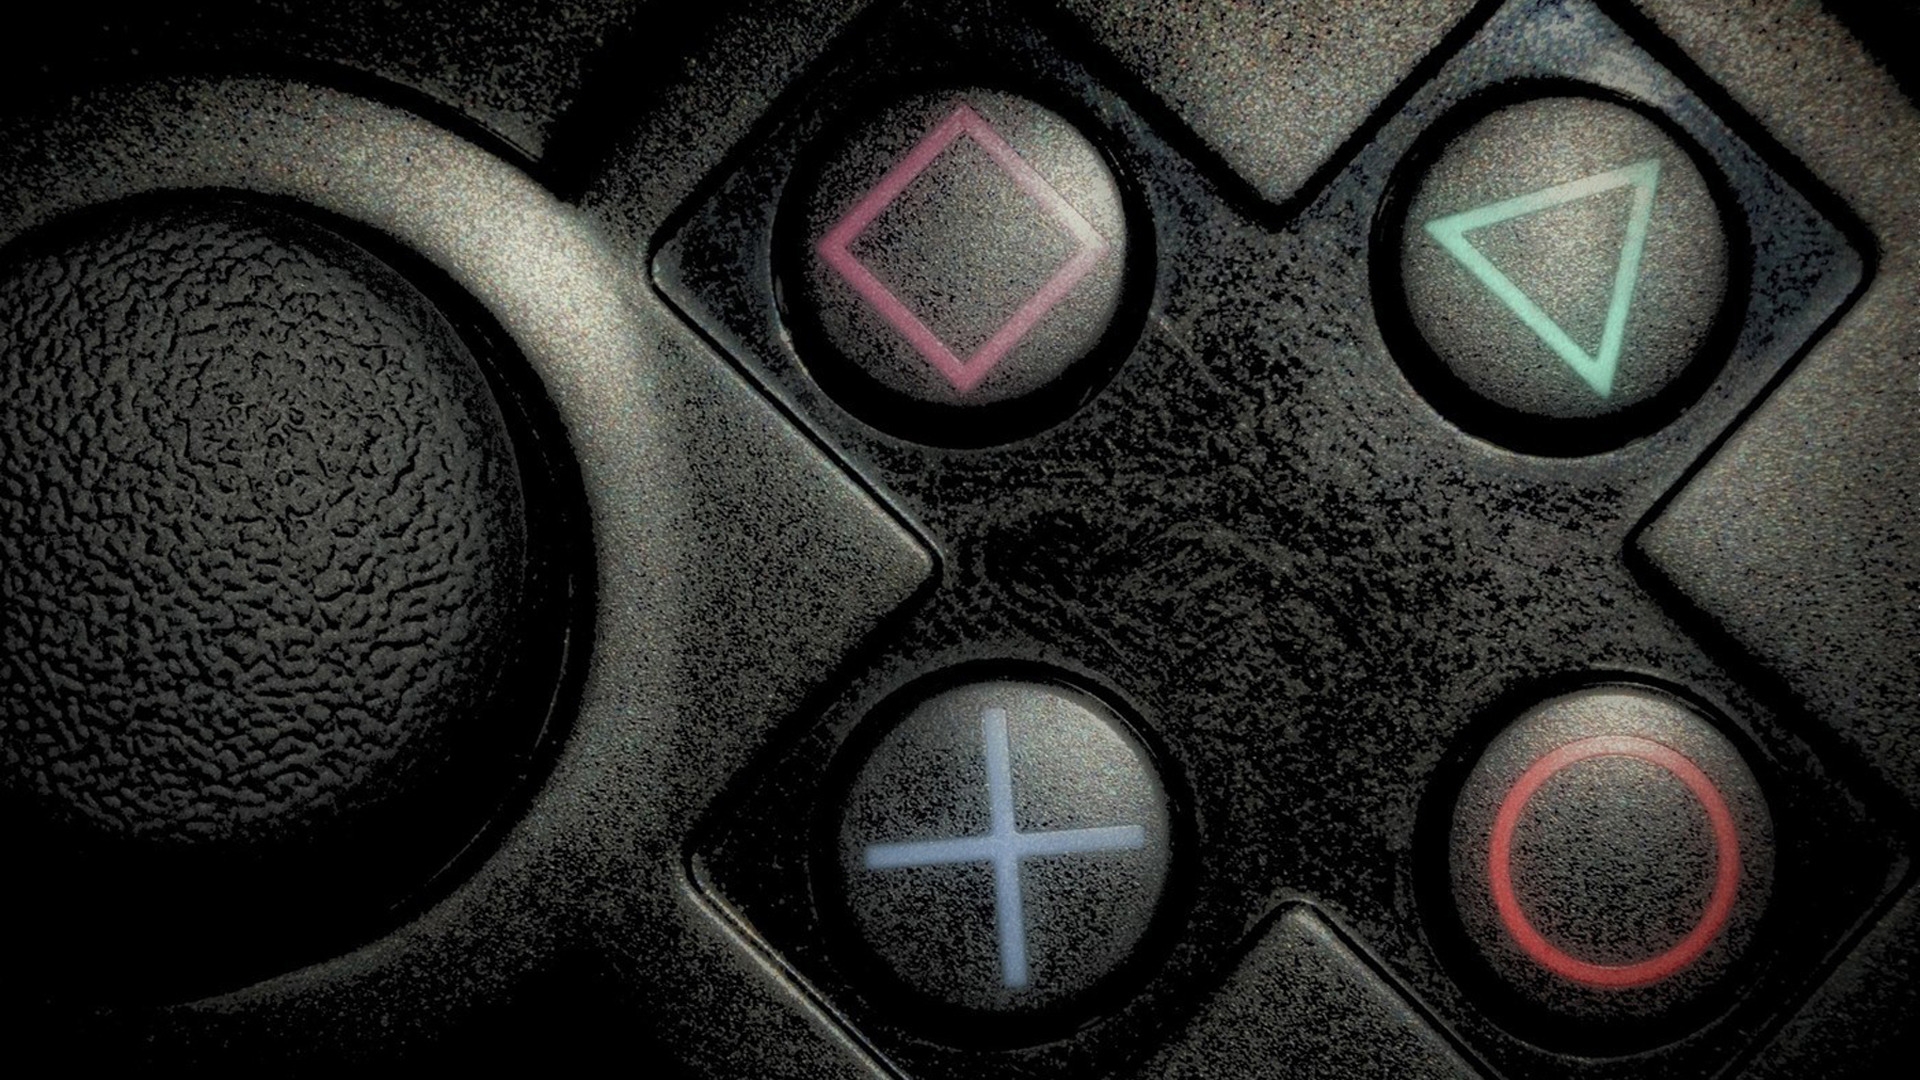 Playstation Buttons for 1920 x 1080 HDTV 1080p resolution